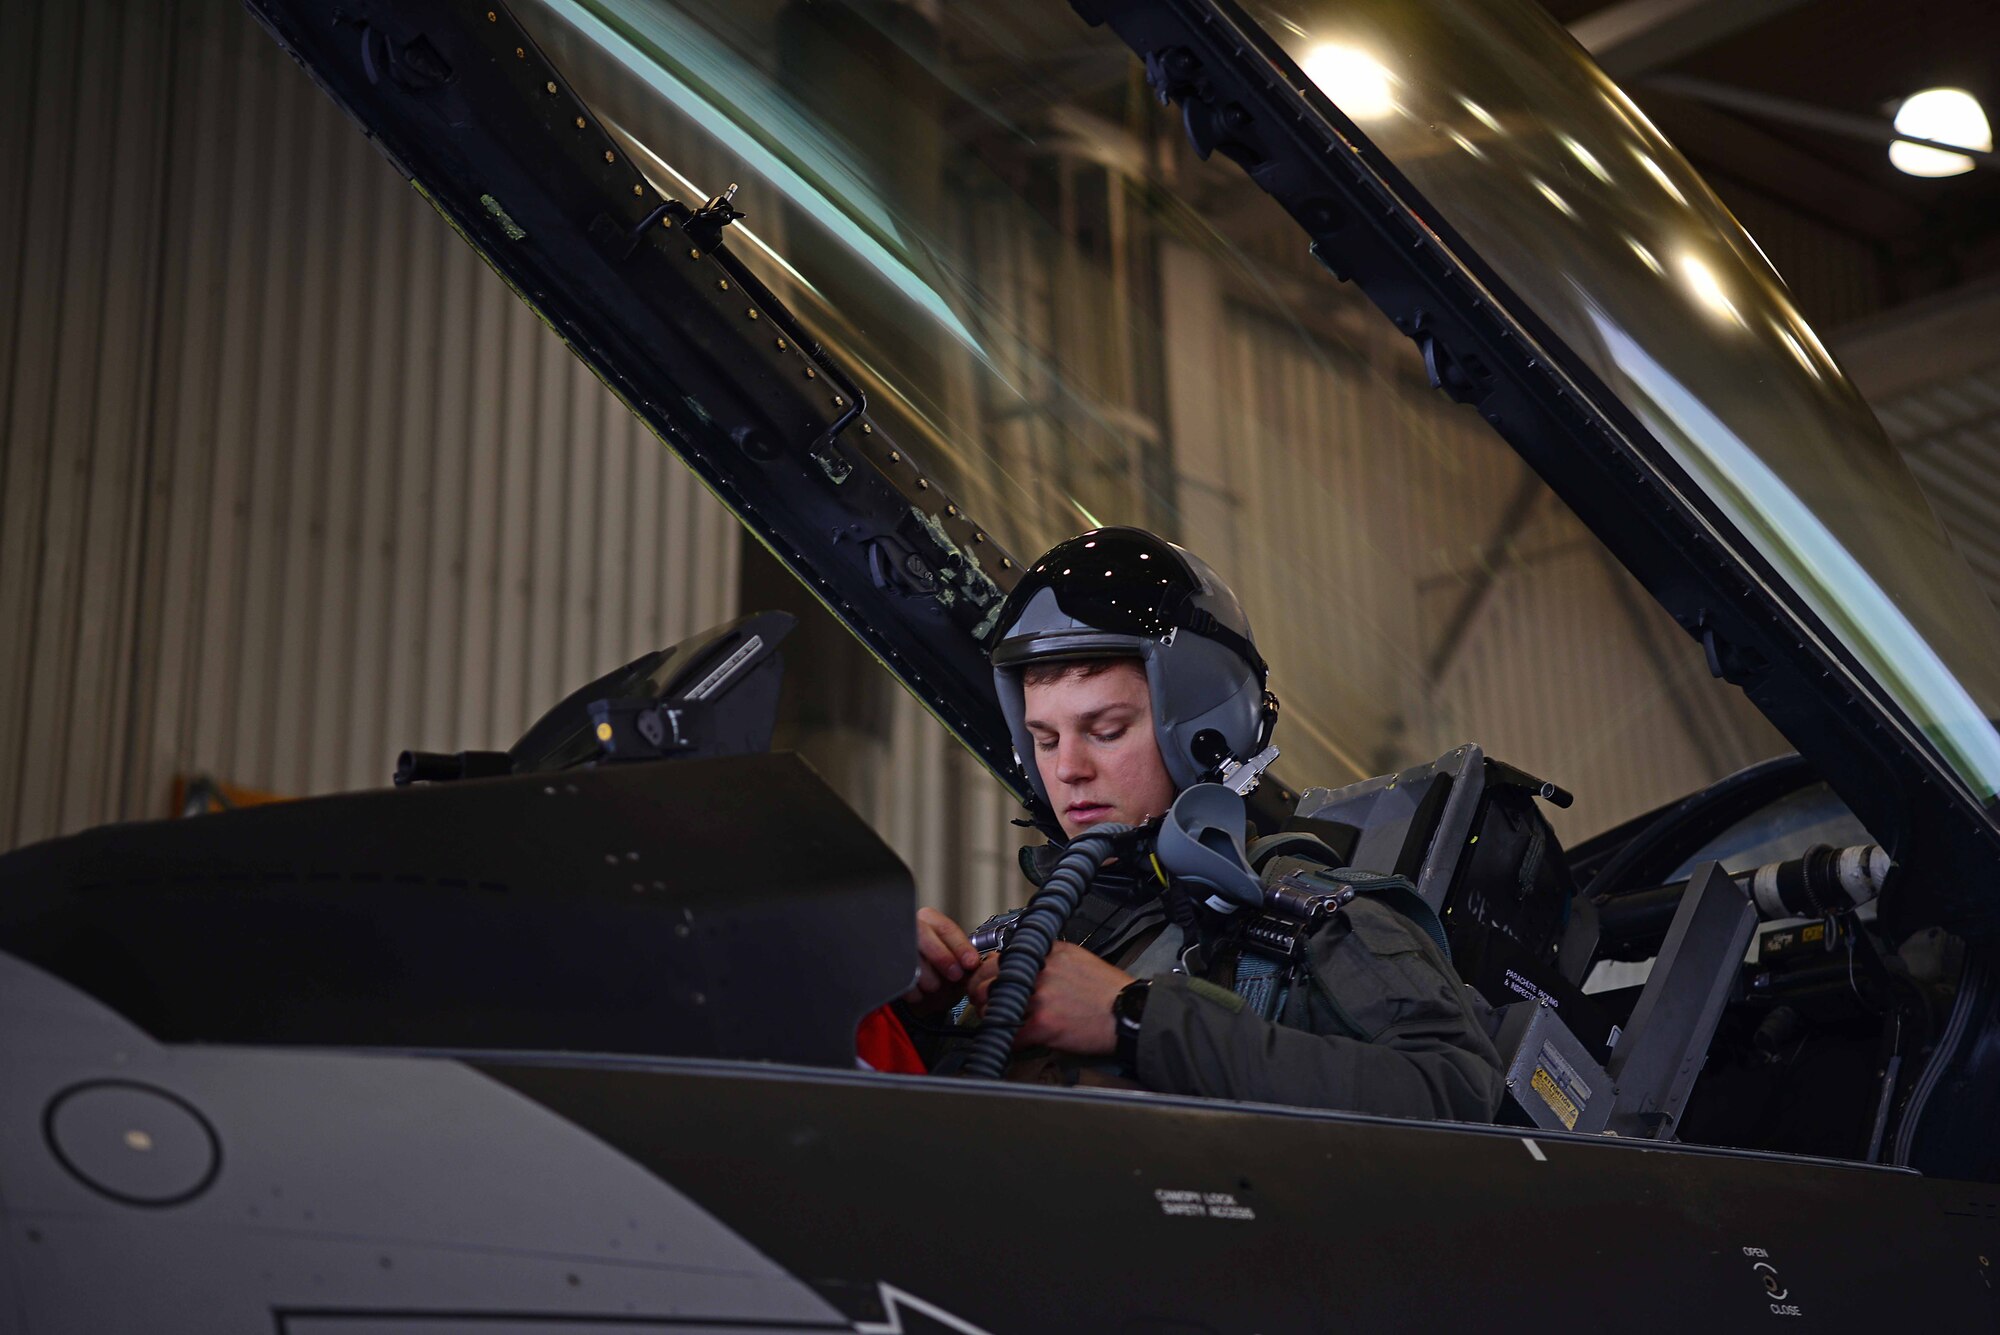 U.S. Air Force Capt. Daniel Simpson, an 18th Aggressor Squadron pilot, prepares for takeoff on Eielson Air Force Base, Alaska, Sept. 8, 2020. The mission of the 18th AGRS is to know, teach and replicate enemy tactics, techniques and procedures. Valiant Shield 20 provides an effective, flexible and capabilities centered force, enabling real-world proficiency in response to a variety of crises. (U.S. Air Force photo by Staff Sgt. Sean Martin)